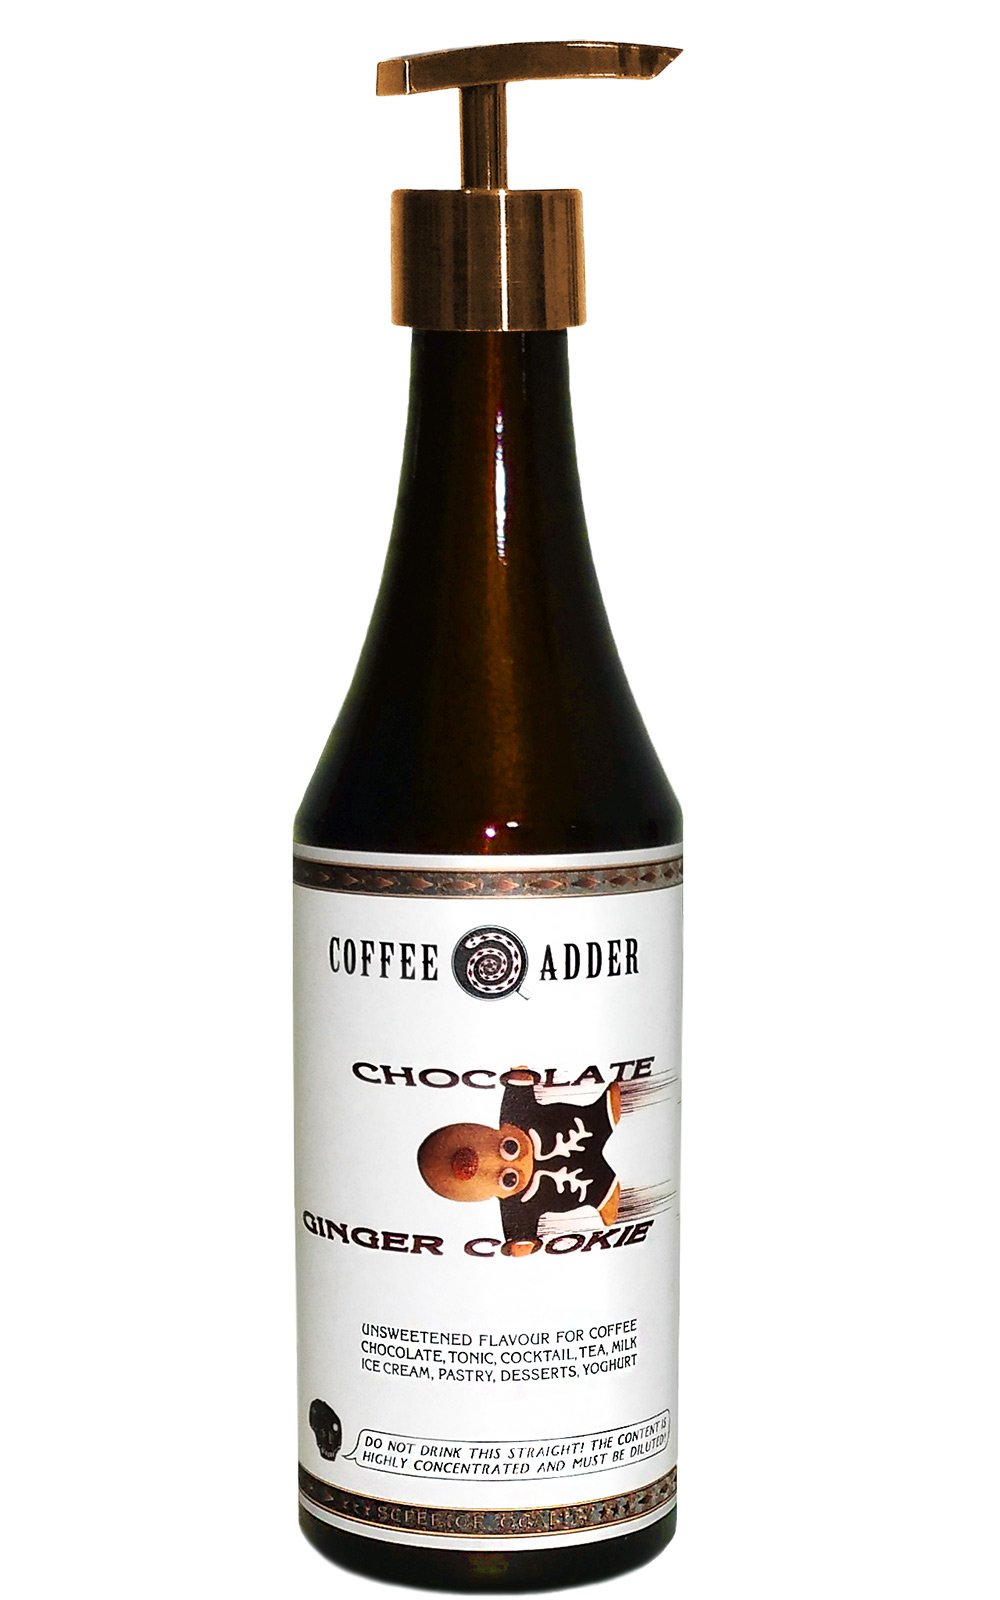 Chocolate dipped Ginger Cookie Syrup